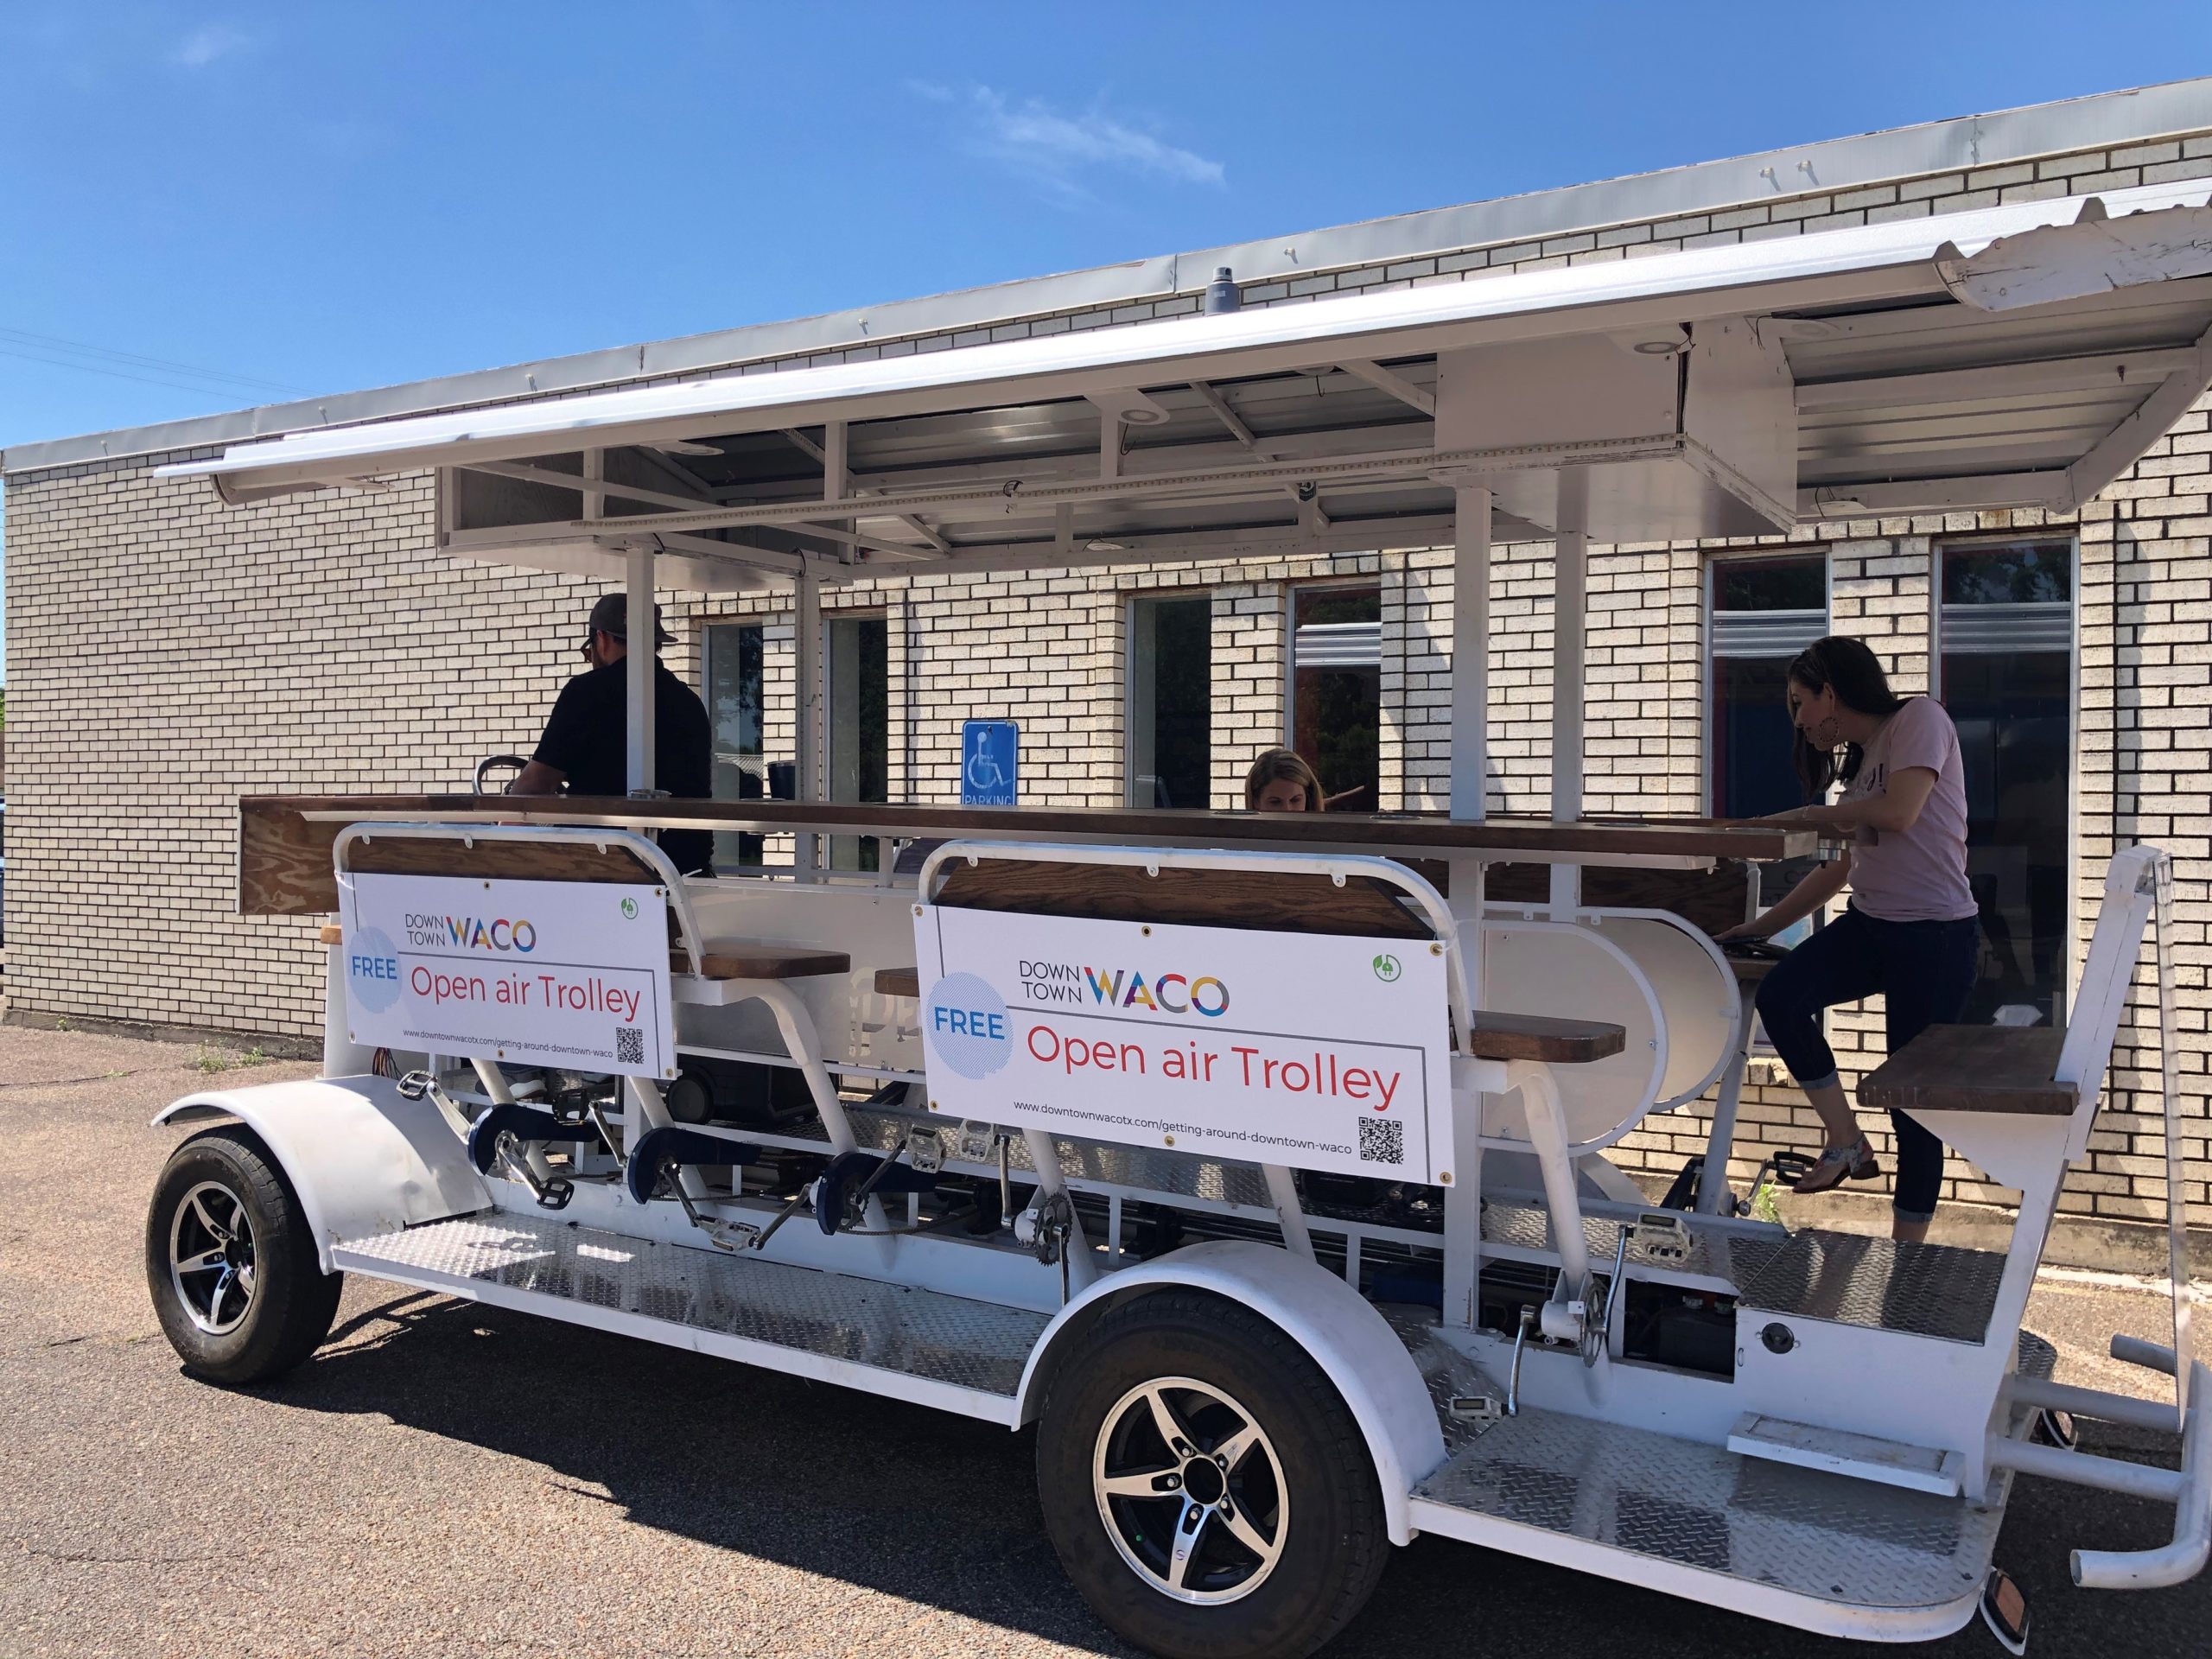 NEW! Open air Trolley to run weekends in Downtown Waco